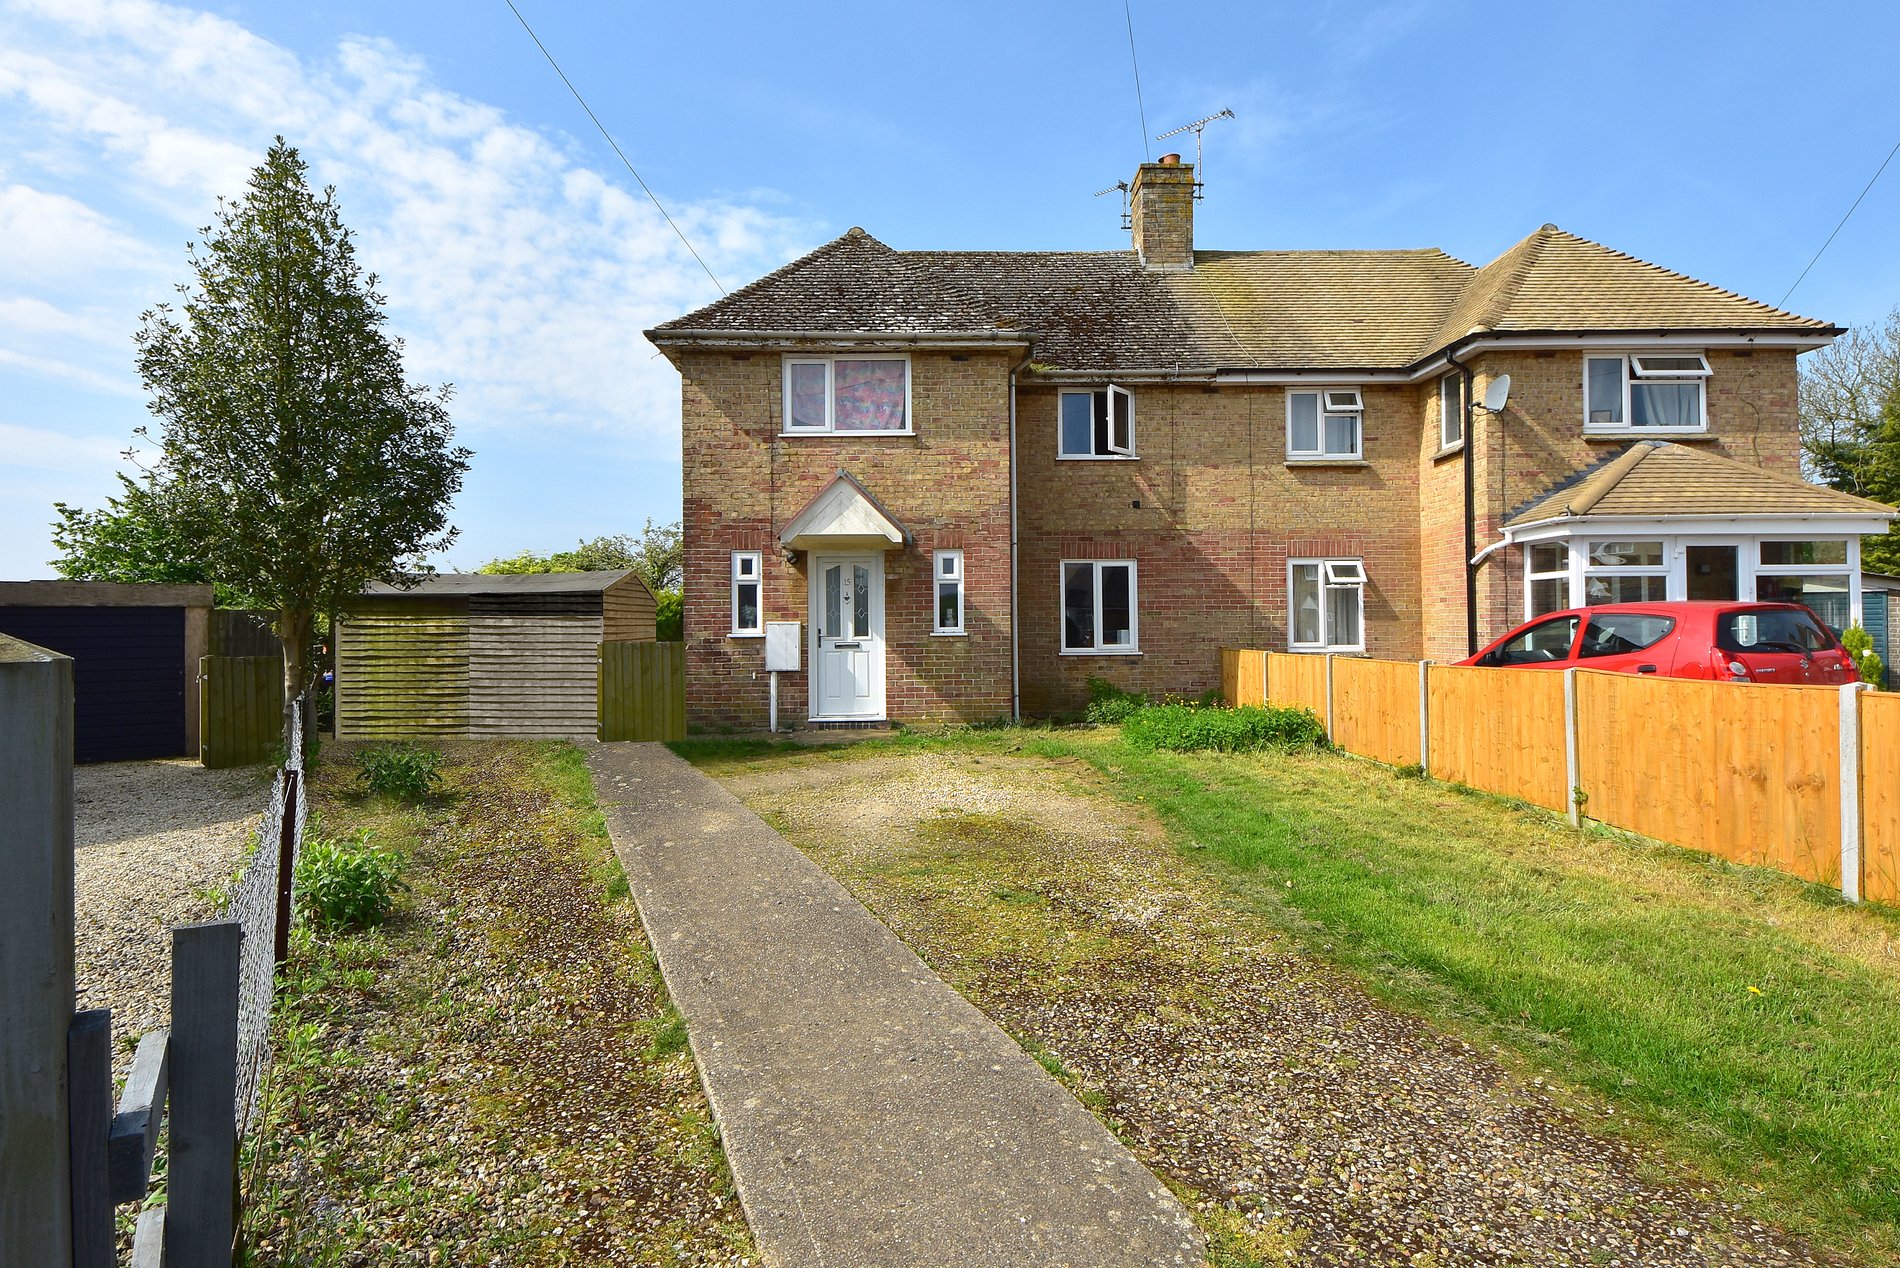 3 bed semi-detached house for sale in Plowden Close, Aston le Walls - Property Image 1